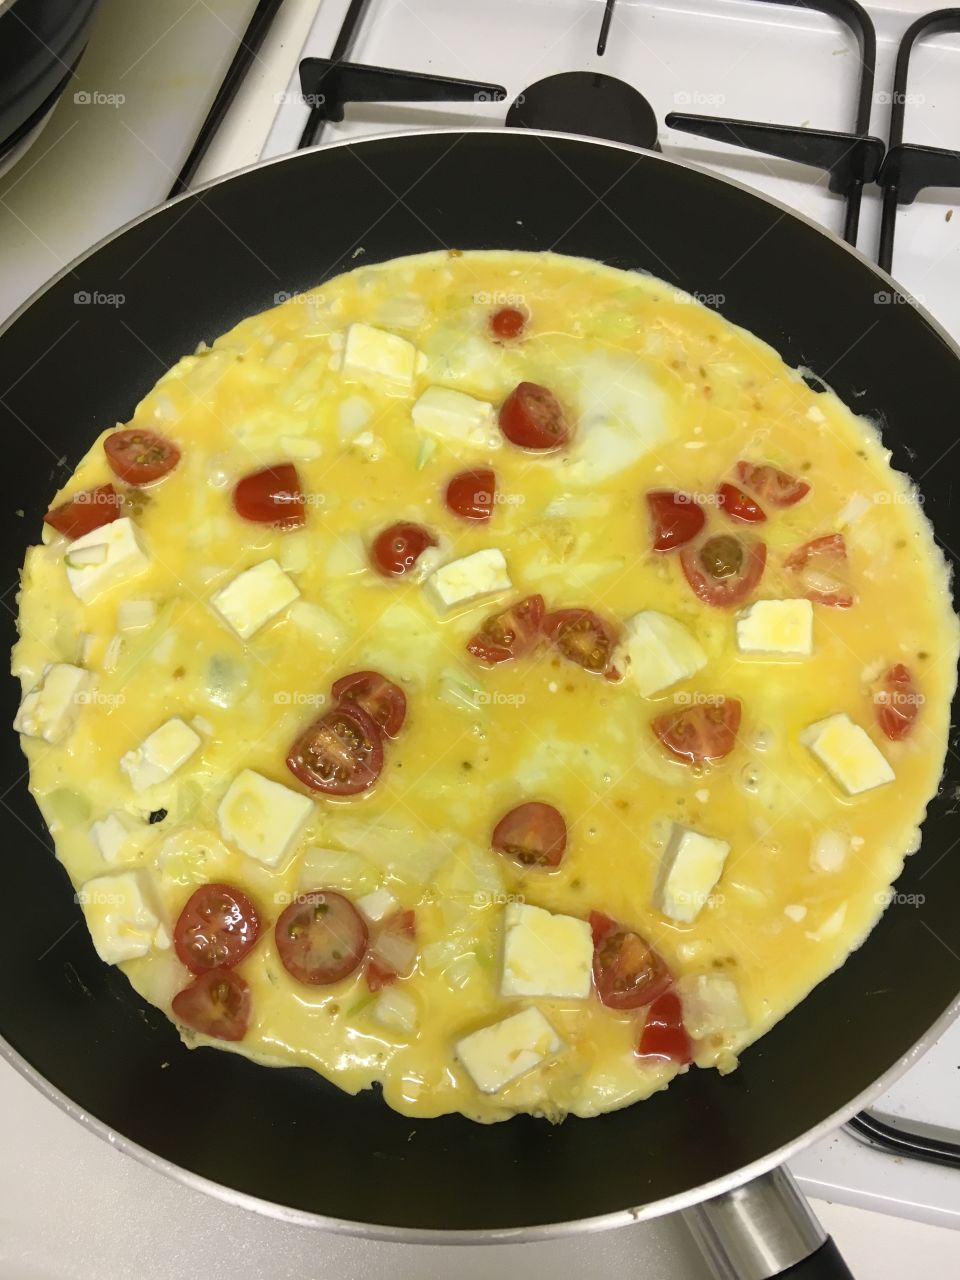 Omelette in the making 